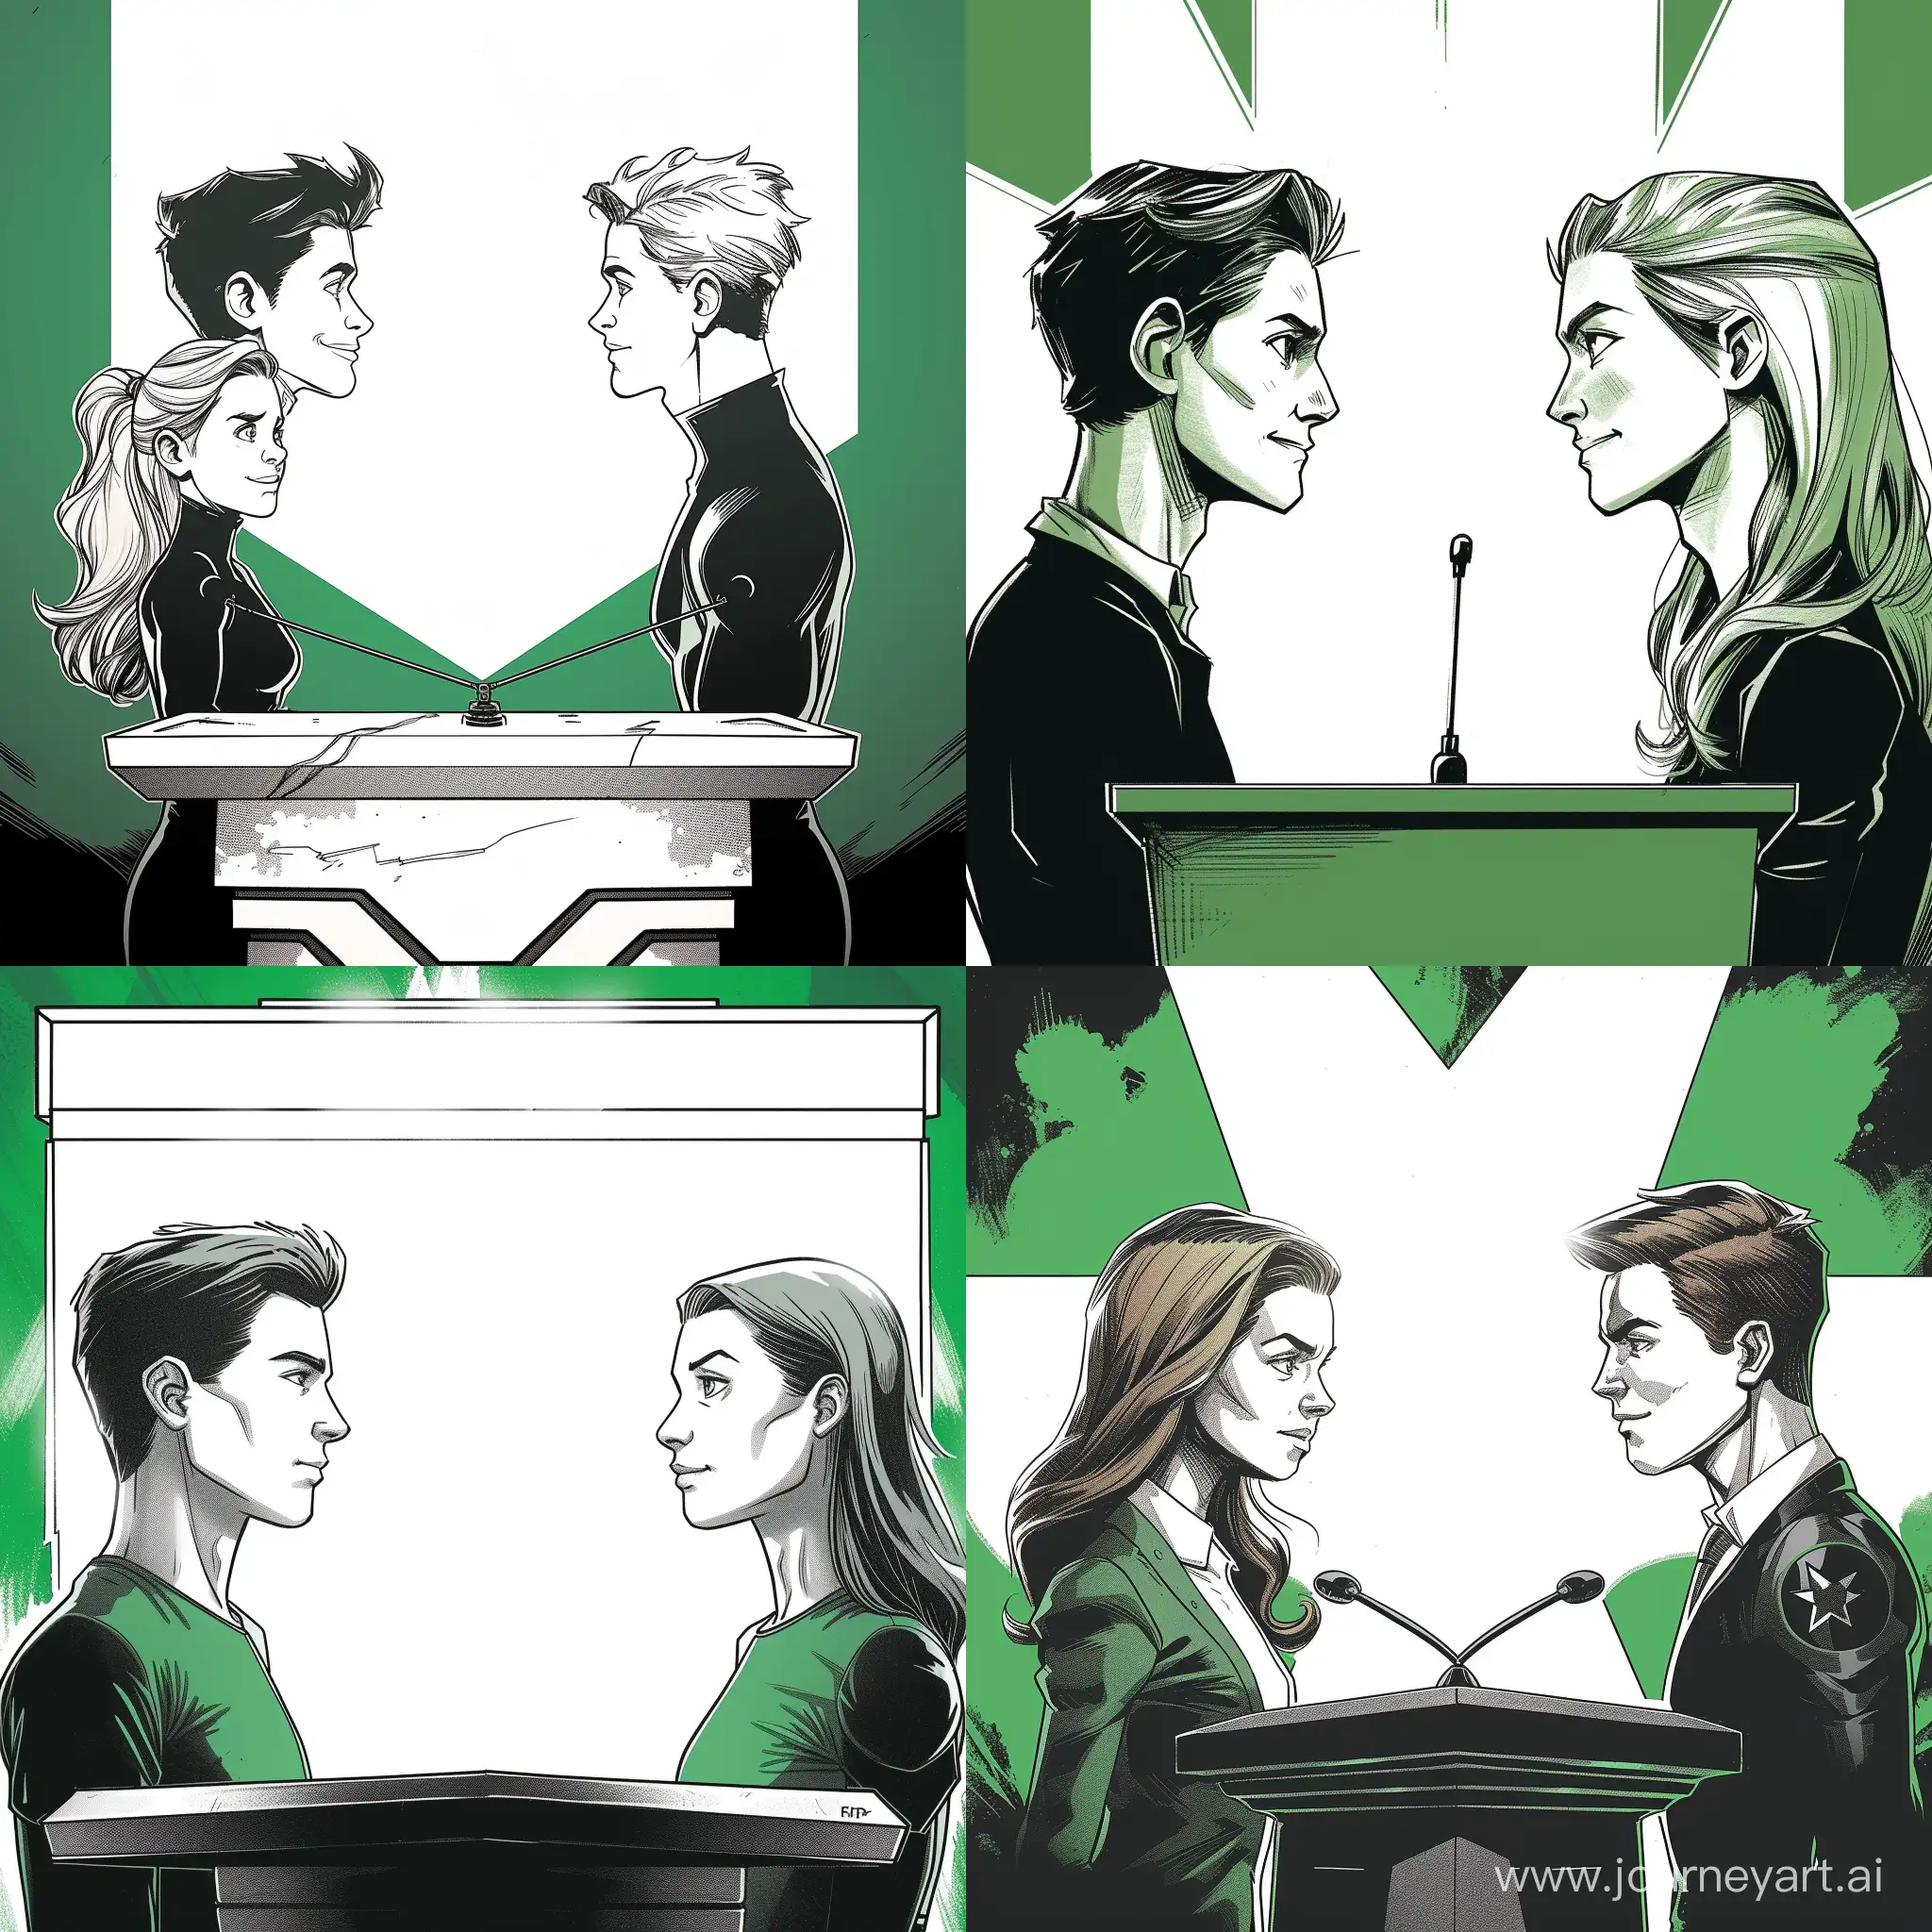 Dynamic-Marvel-Cartoon-Debate-Young-Couple-in-White-and-Green